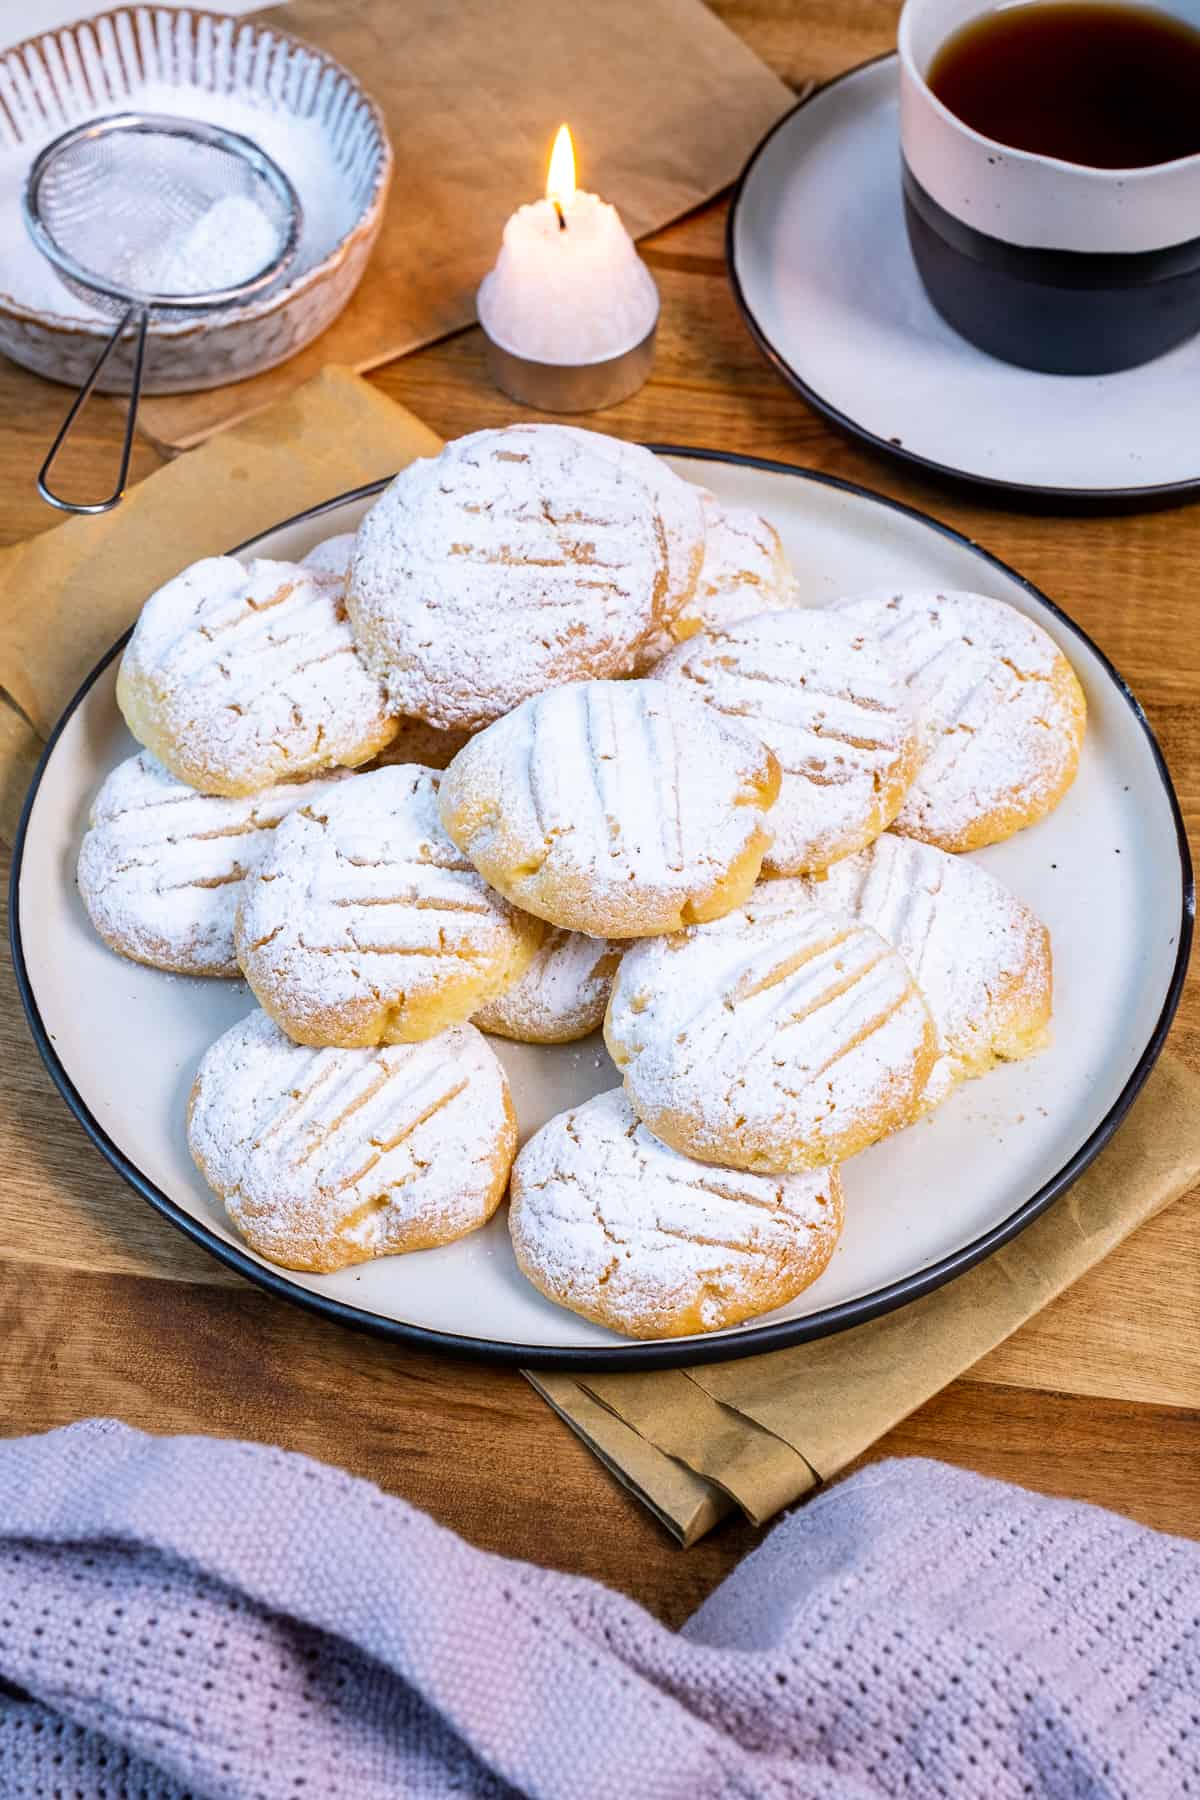 Cornflour cookies on a plate, a cup of tea, a small candle and powdered sugar on the side.